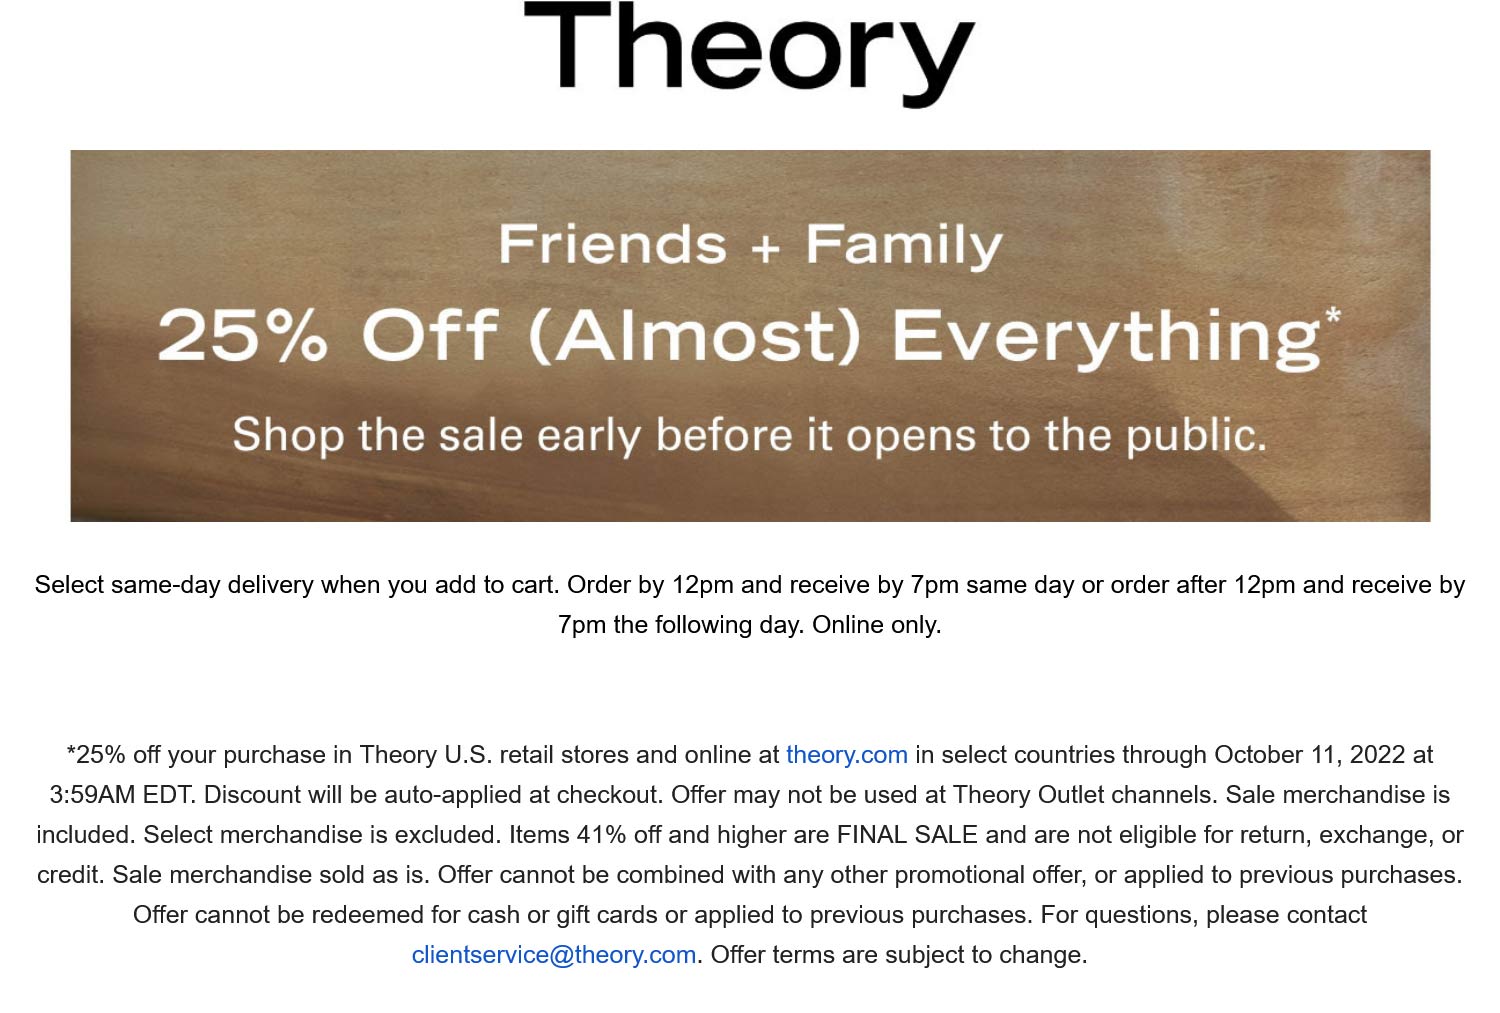 Theory coupons & promo code for [November 2022]